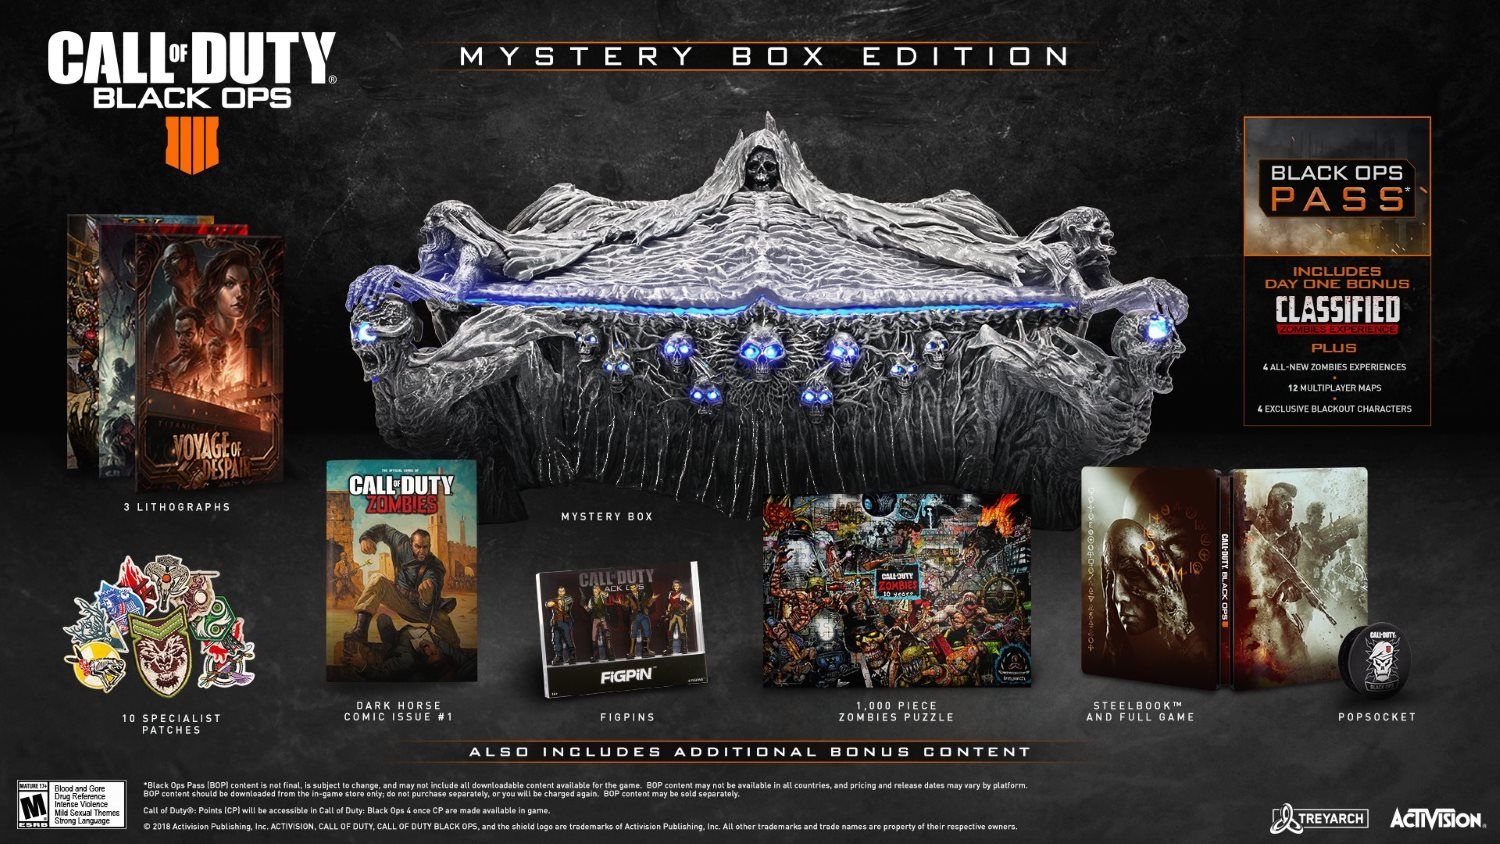 CoD Black Ops IIII “Blood of the Dead” Is Coming Along With Mystery Box Edition